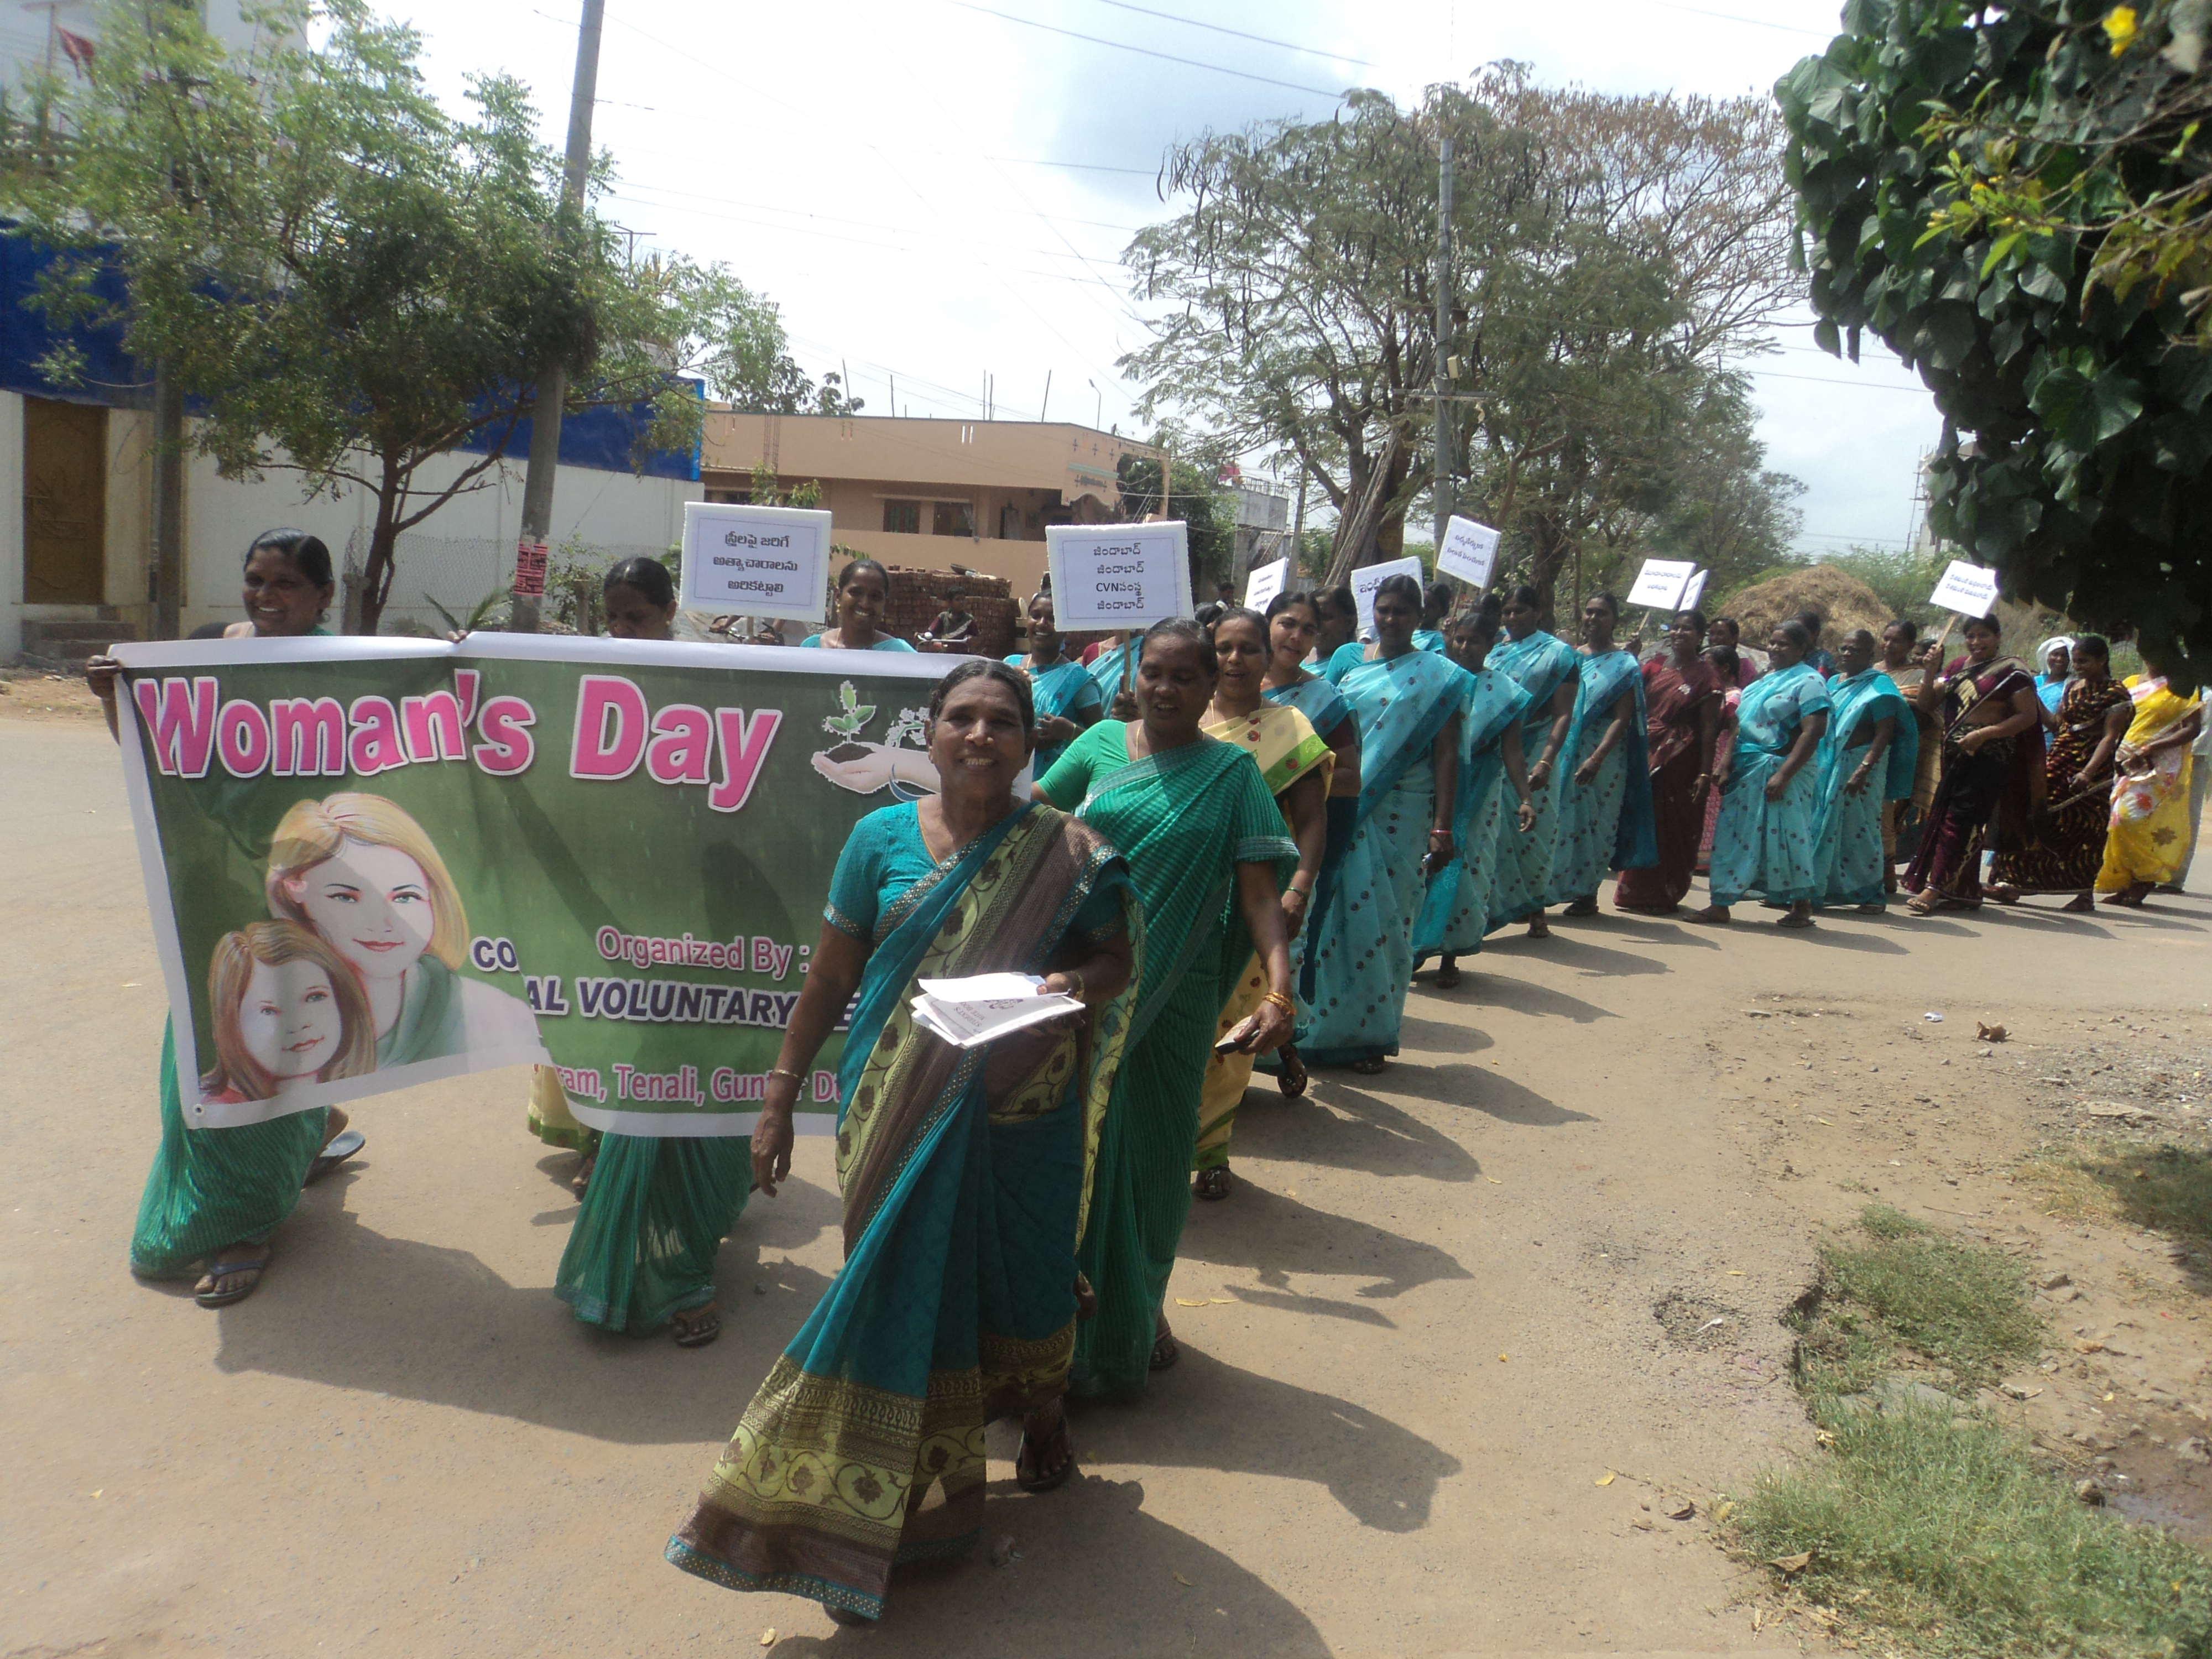 Cancer Awareness, and Personal Hygienic Campaign Rally